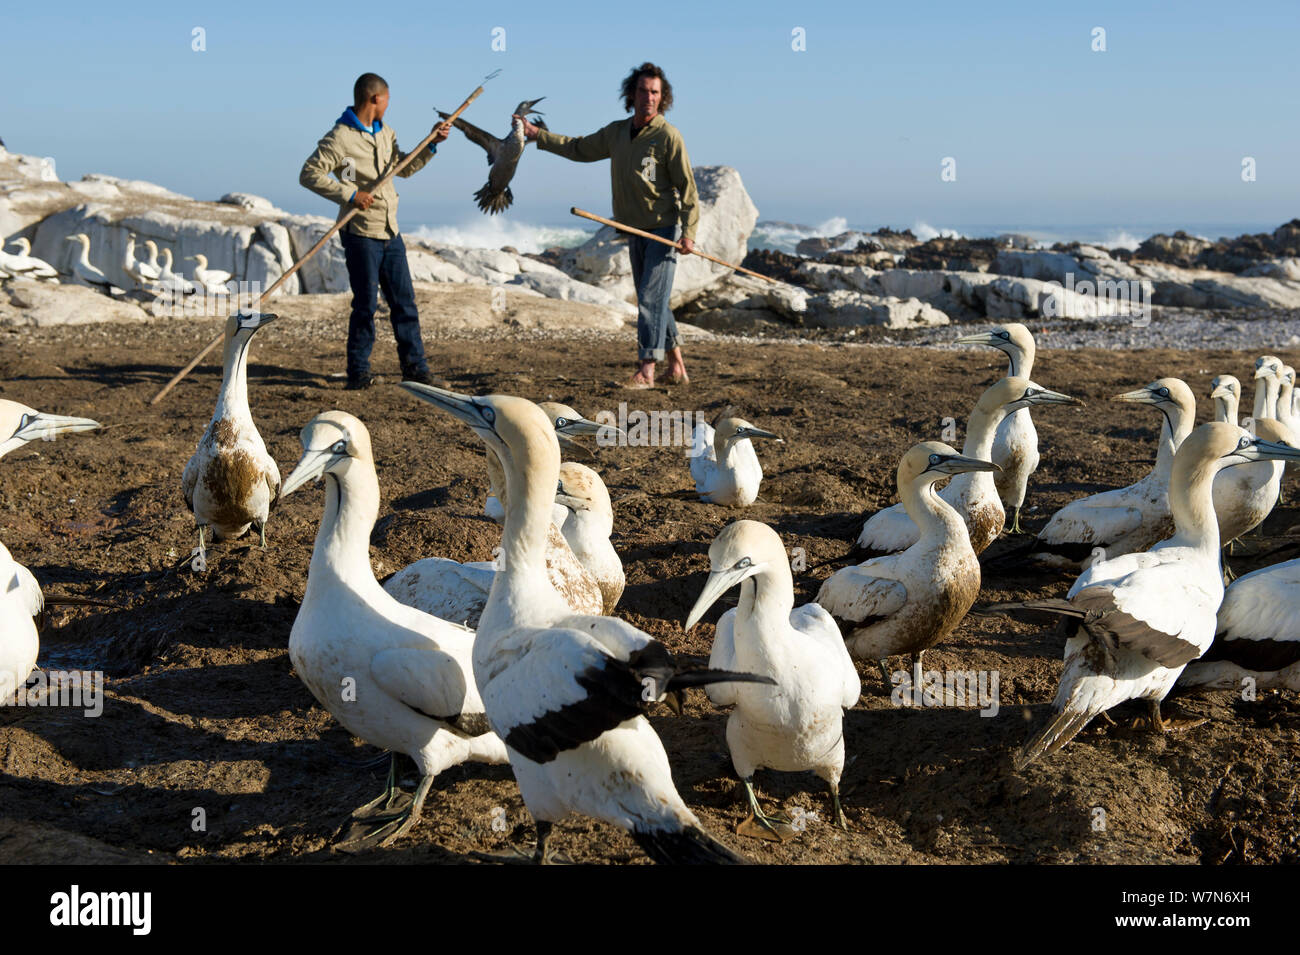 Yves Chesselet (Cape Nature) captures Cape gannet juveniles (morus capensis) from the colony on Bird Island, Lambert's Bay, South Africa May 2012. The birds were abandoned by their parents. After capture the gannets were sent to SANCCOB for hand rearing and release back in to the wild. Southern African Foundation for the Conservation of Coastal Birds (SANCCOB). Stock Photo